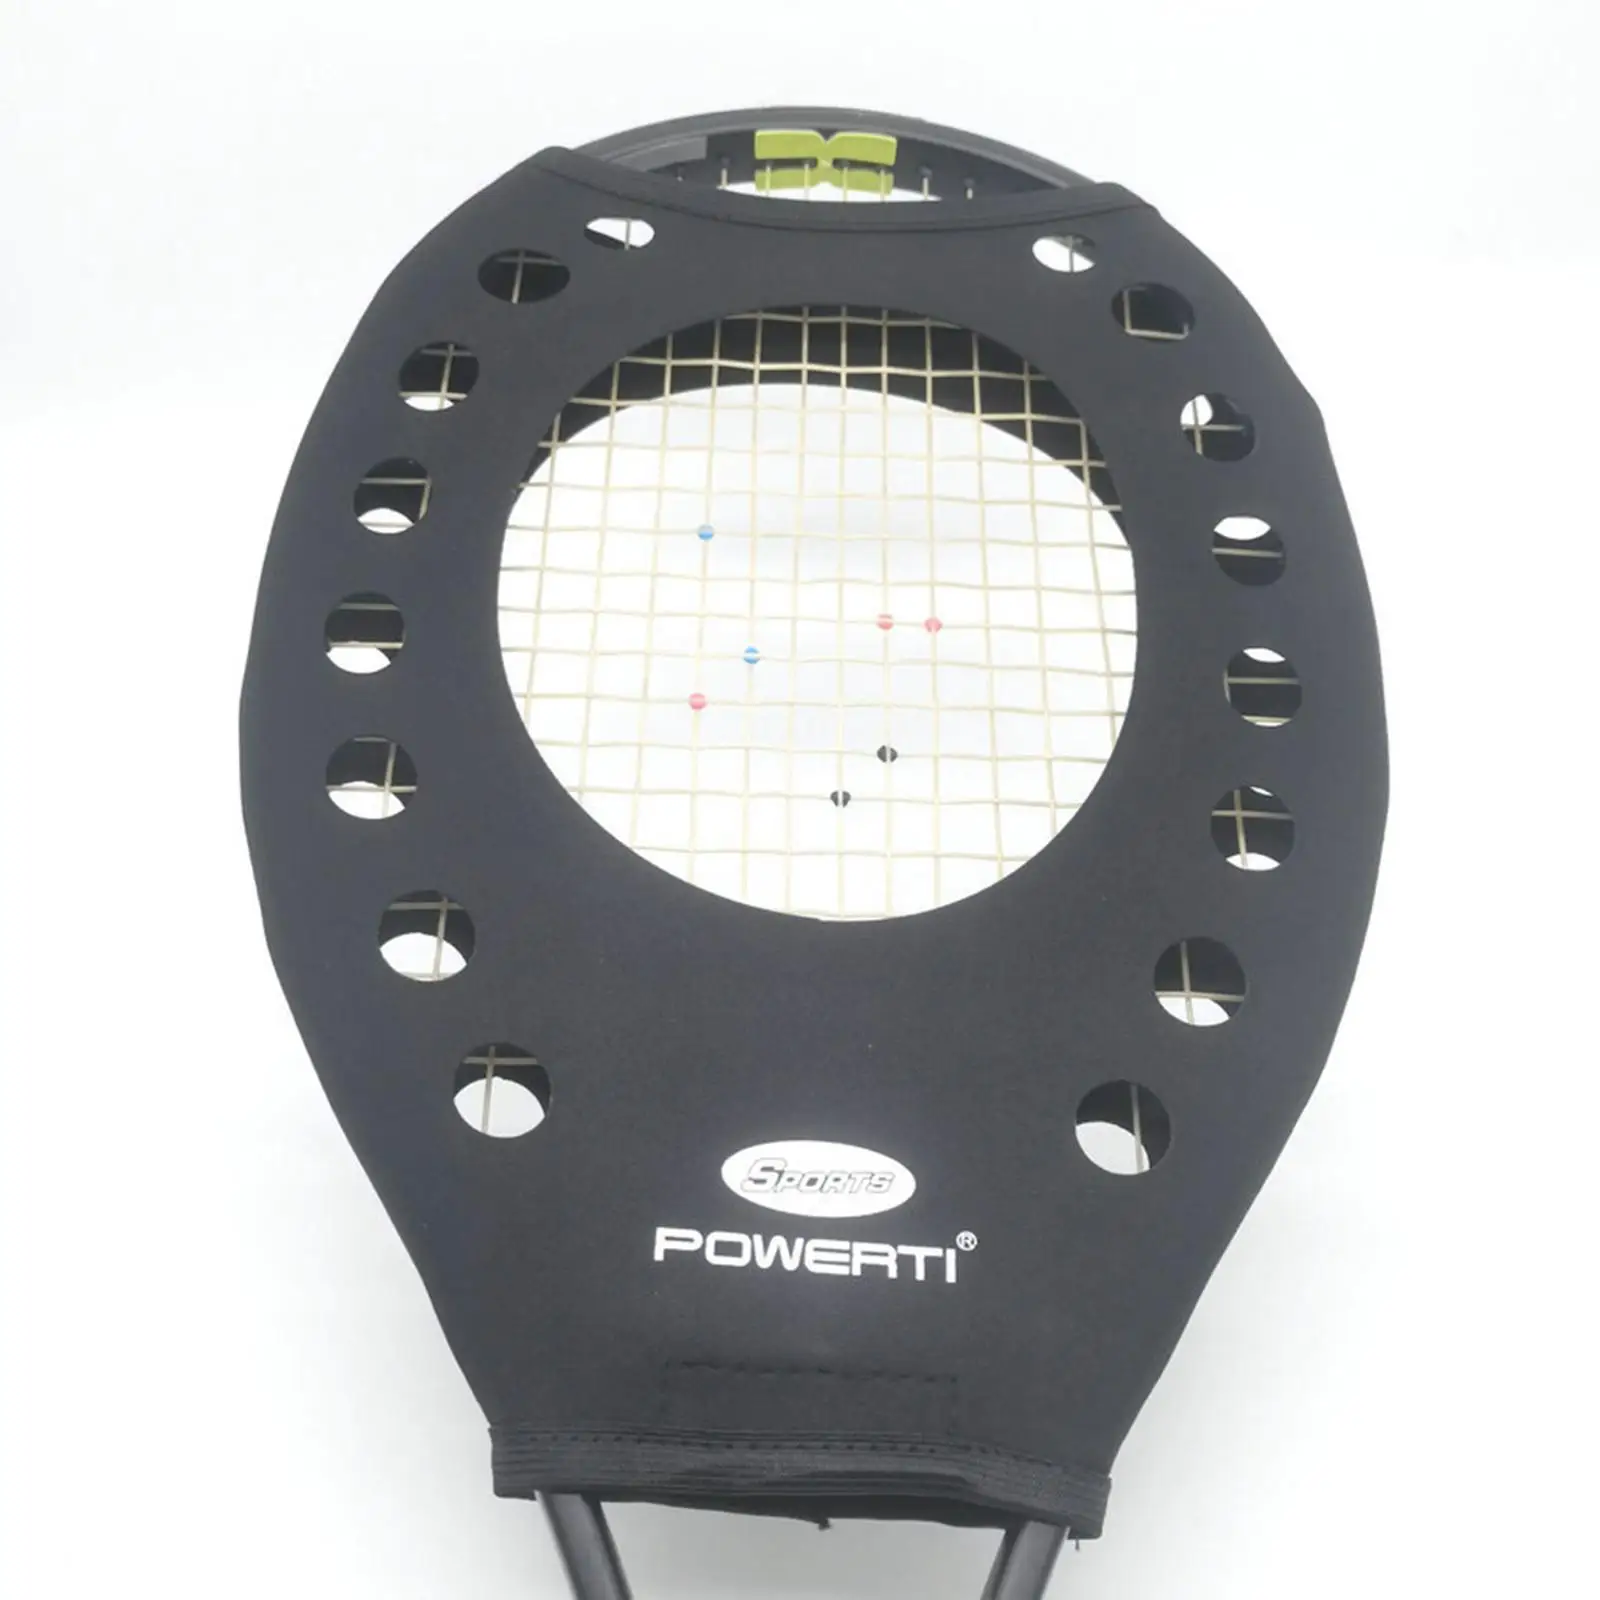 Tennis Racket Sweet Spot Trainer Learn to Hit The Center Swing Training Aid for Outdoor Sports